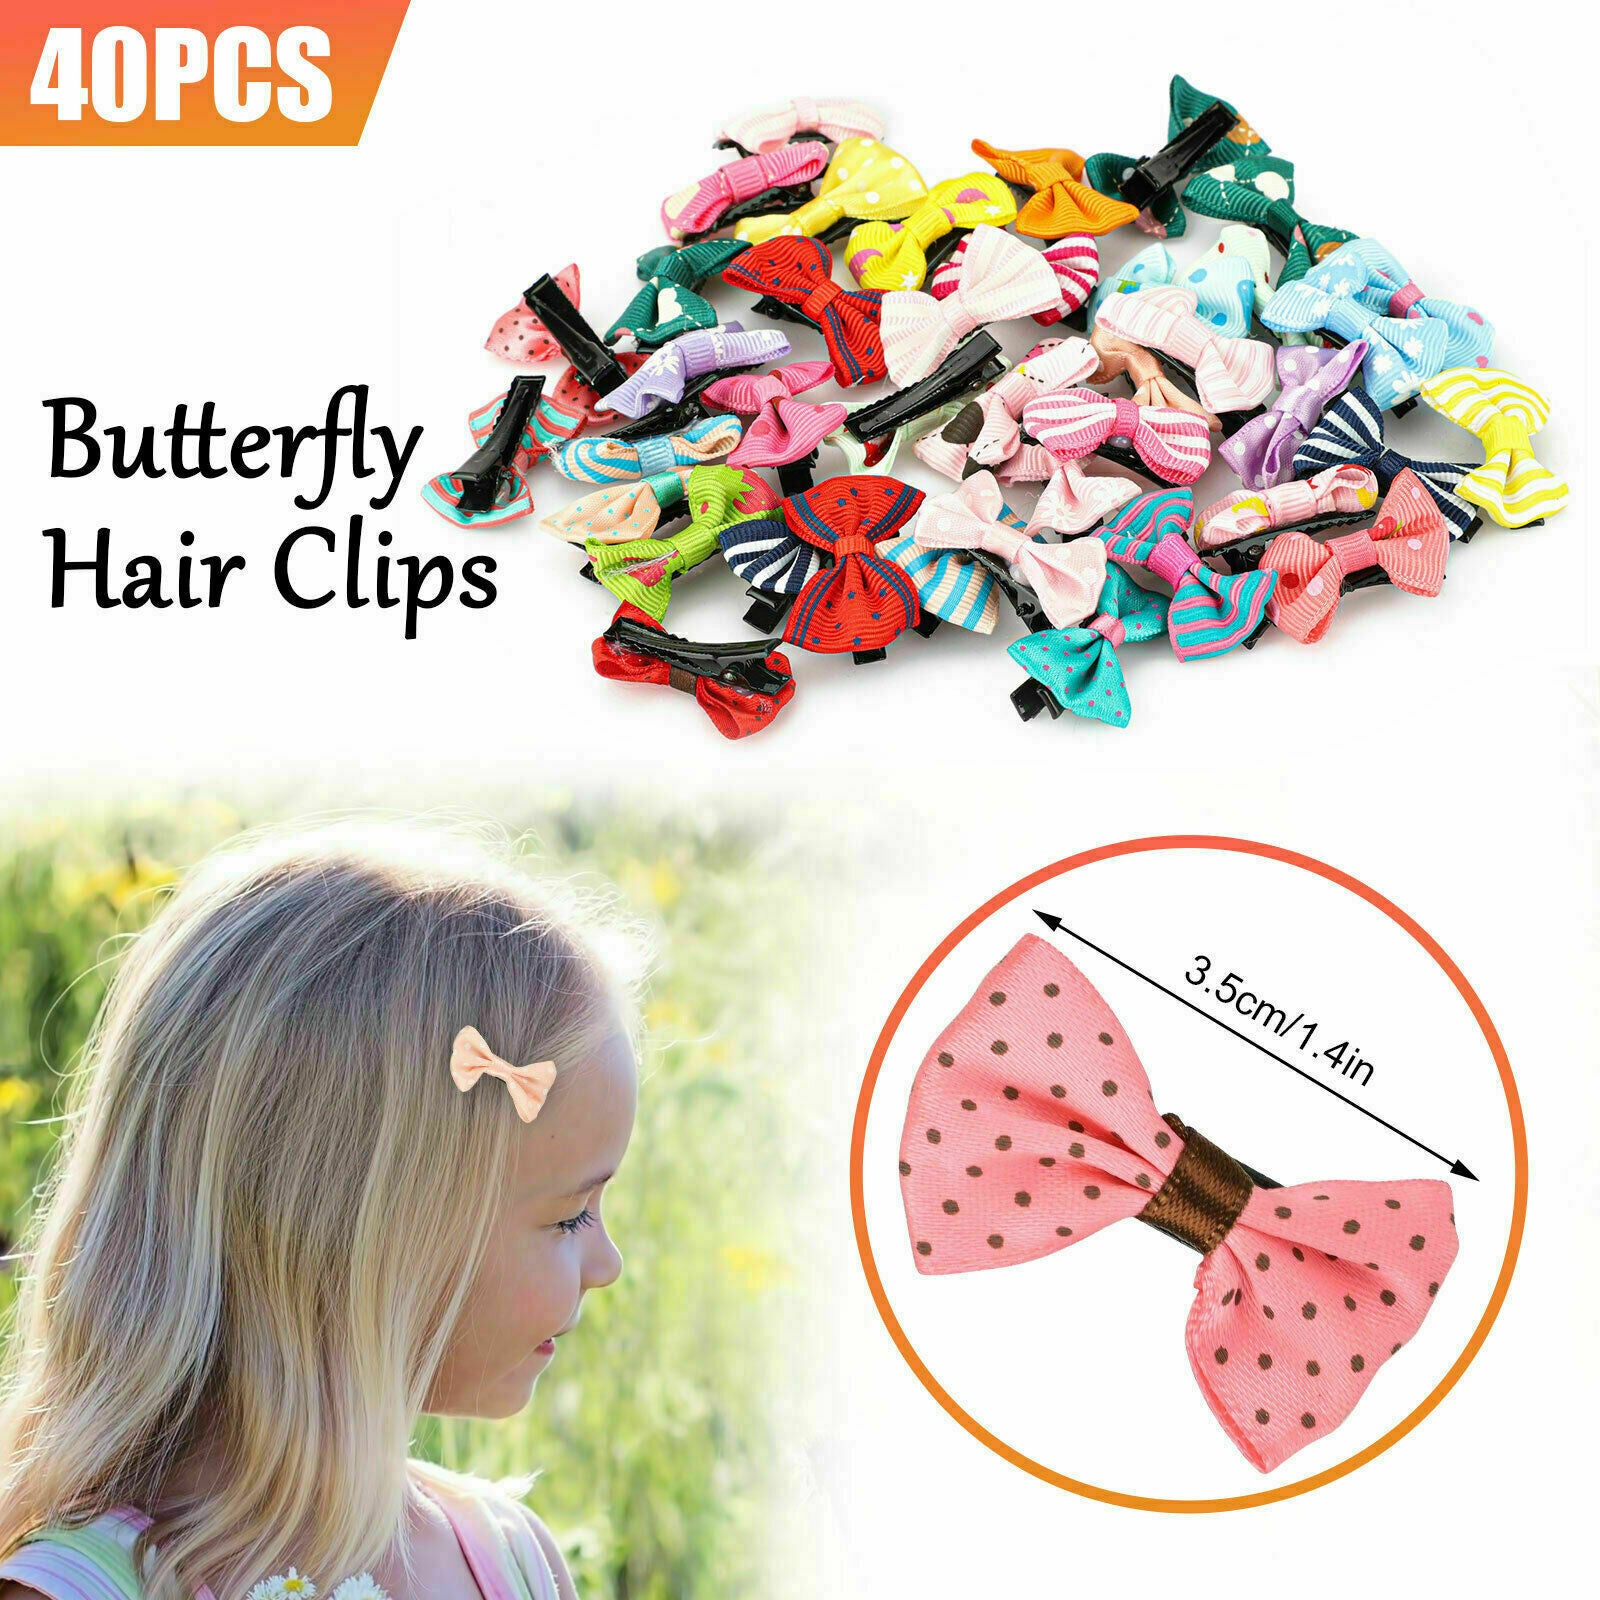 Lot Mini Flower Hair Clip Bow Hairpin Accessories Colorful for Baby Toddler Girl